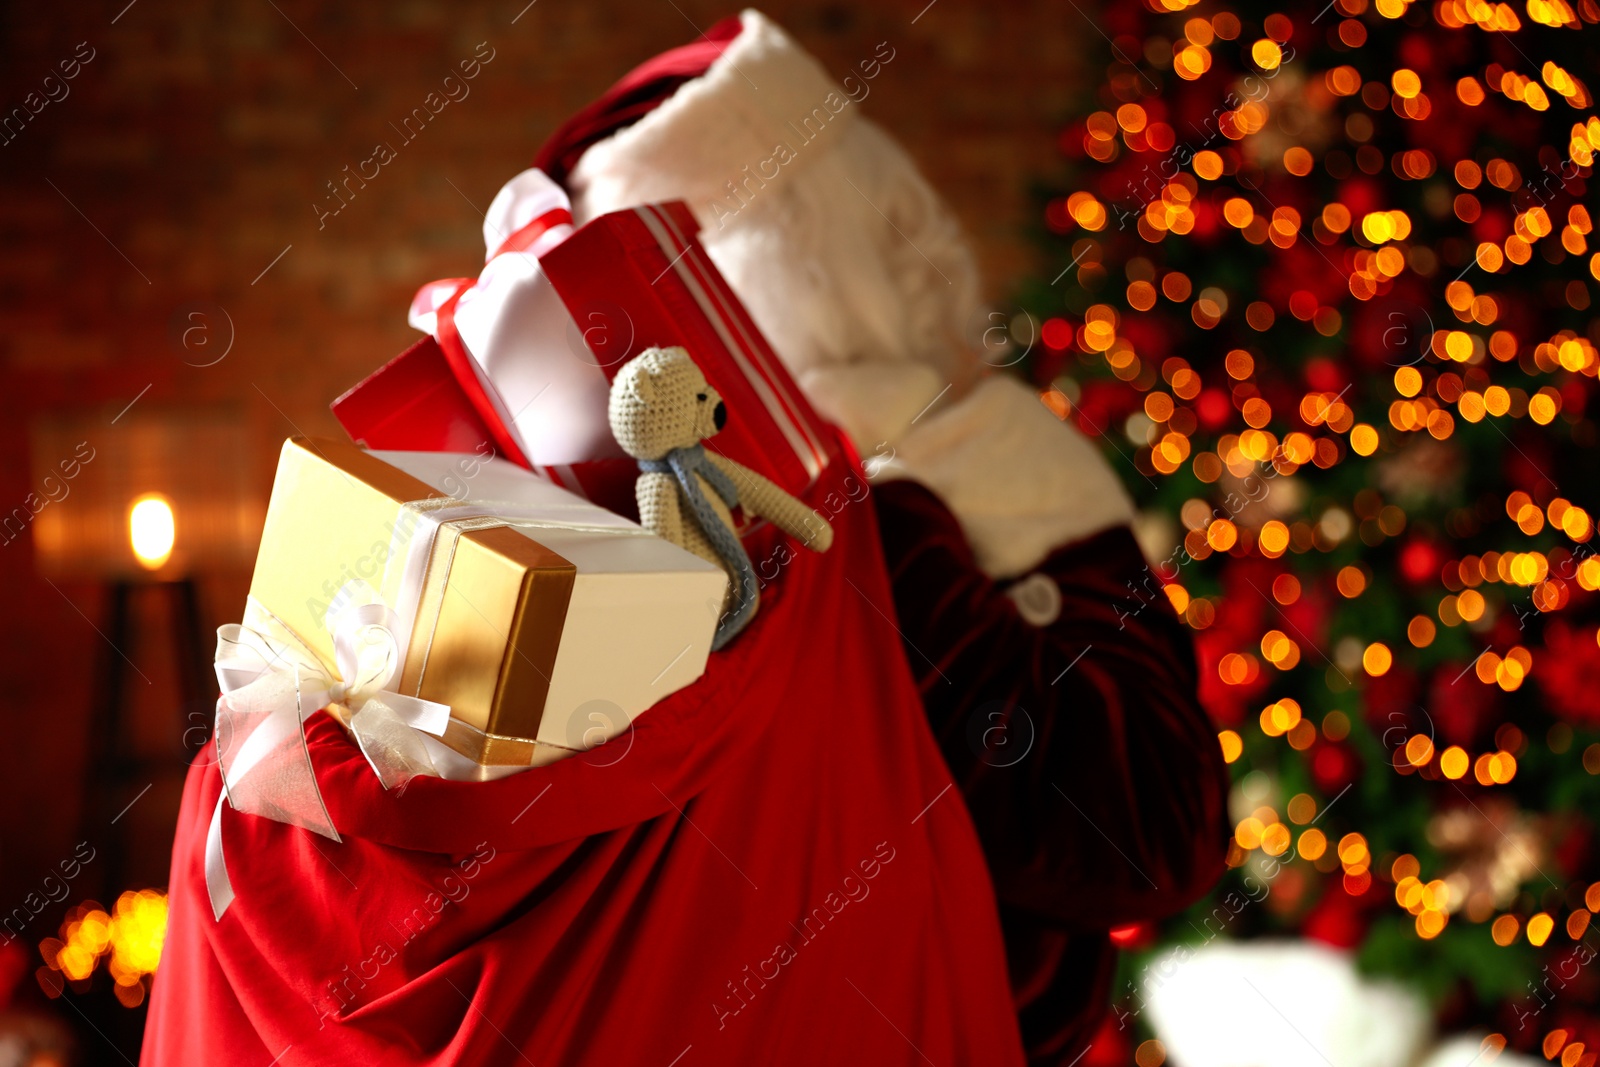 Photo of Santa Claus holding bag full of Christmas gifts against blurred festive lights